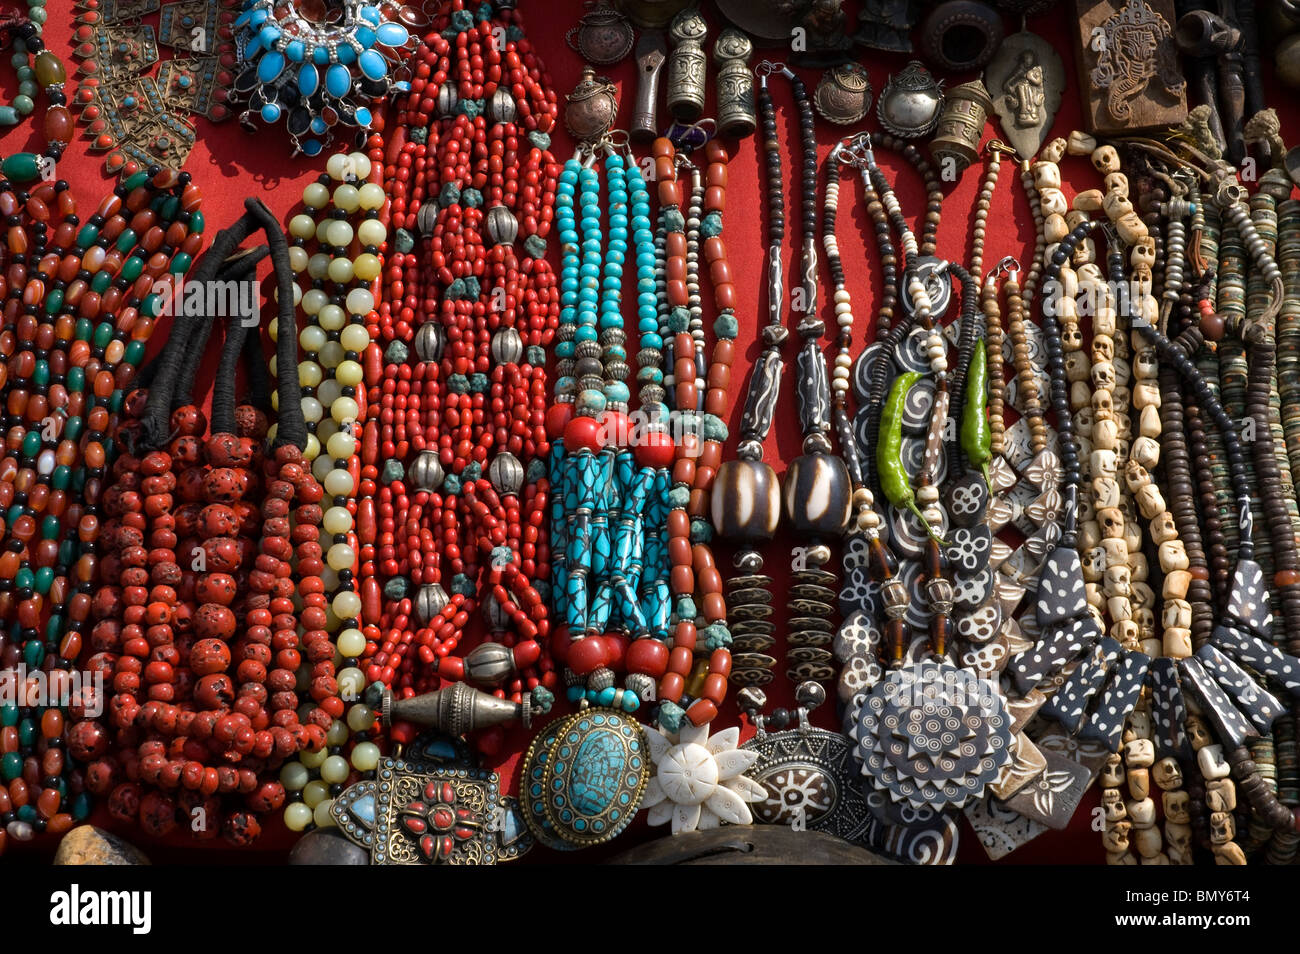 Necklaces and Mala beads of bone, shell, red coral, turquoise, and other materials, for sale in Durbar Square, Kathmandu, Nepal. Stock Photo